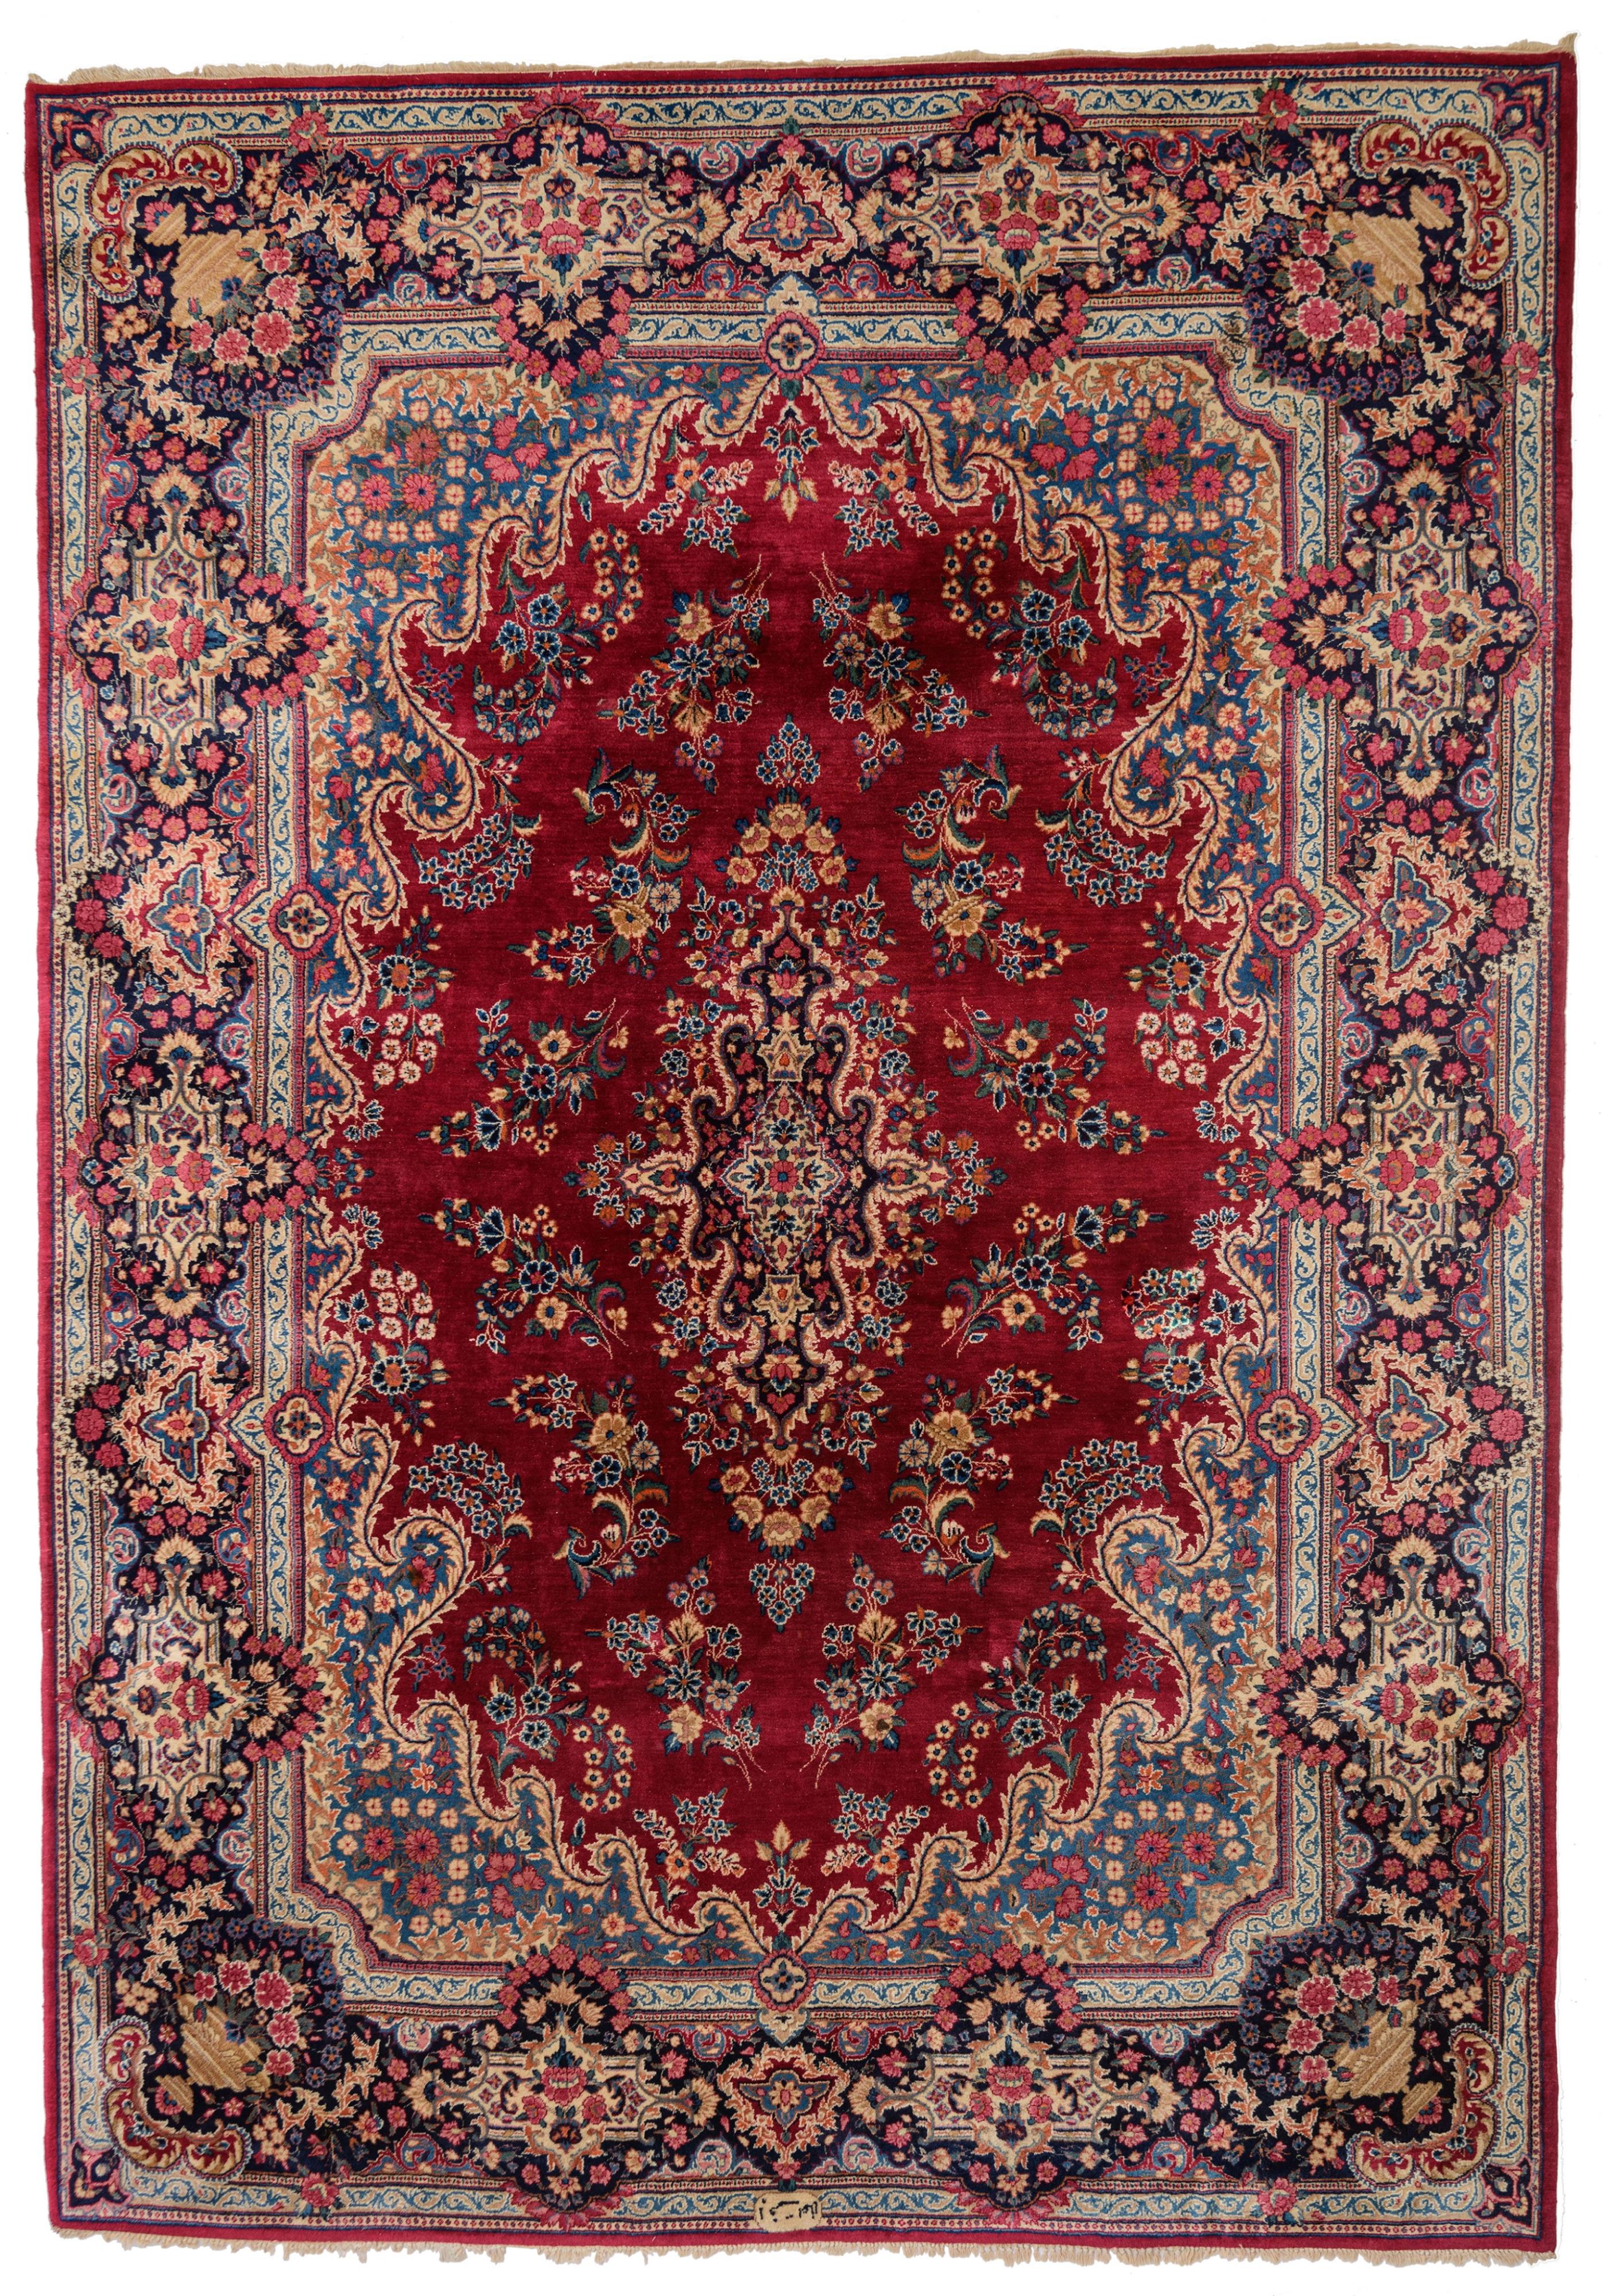 A large Oriental woollen rug, floral decorated, signed, 360 x 260 cm